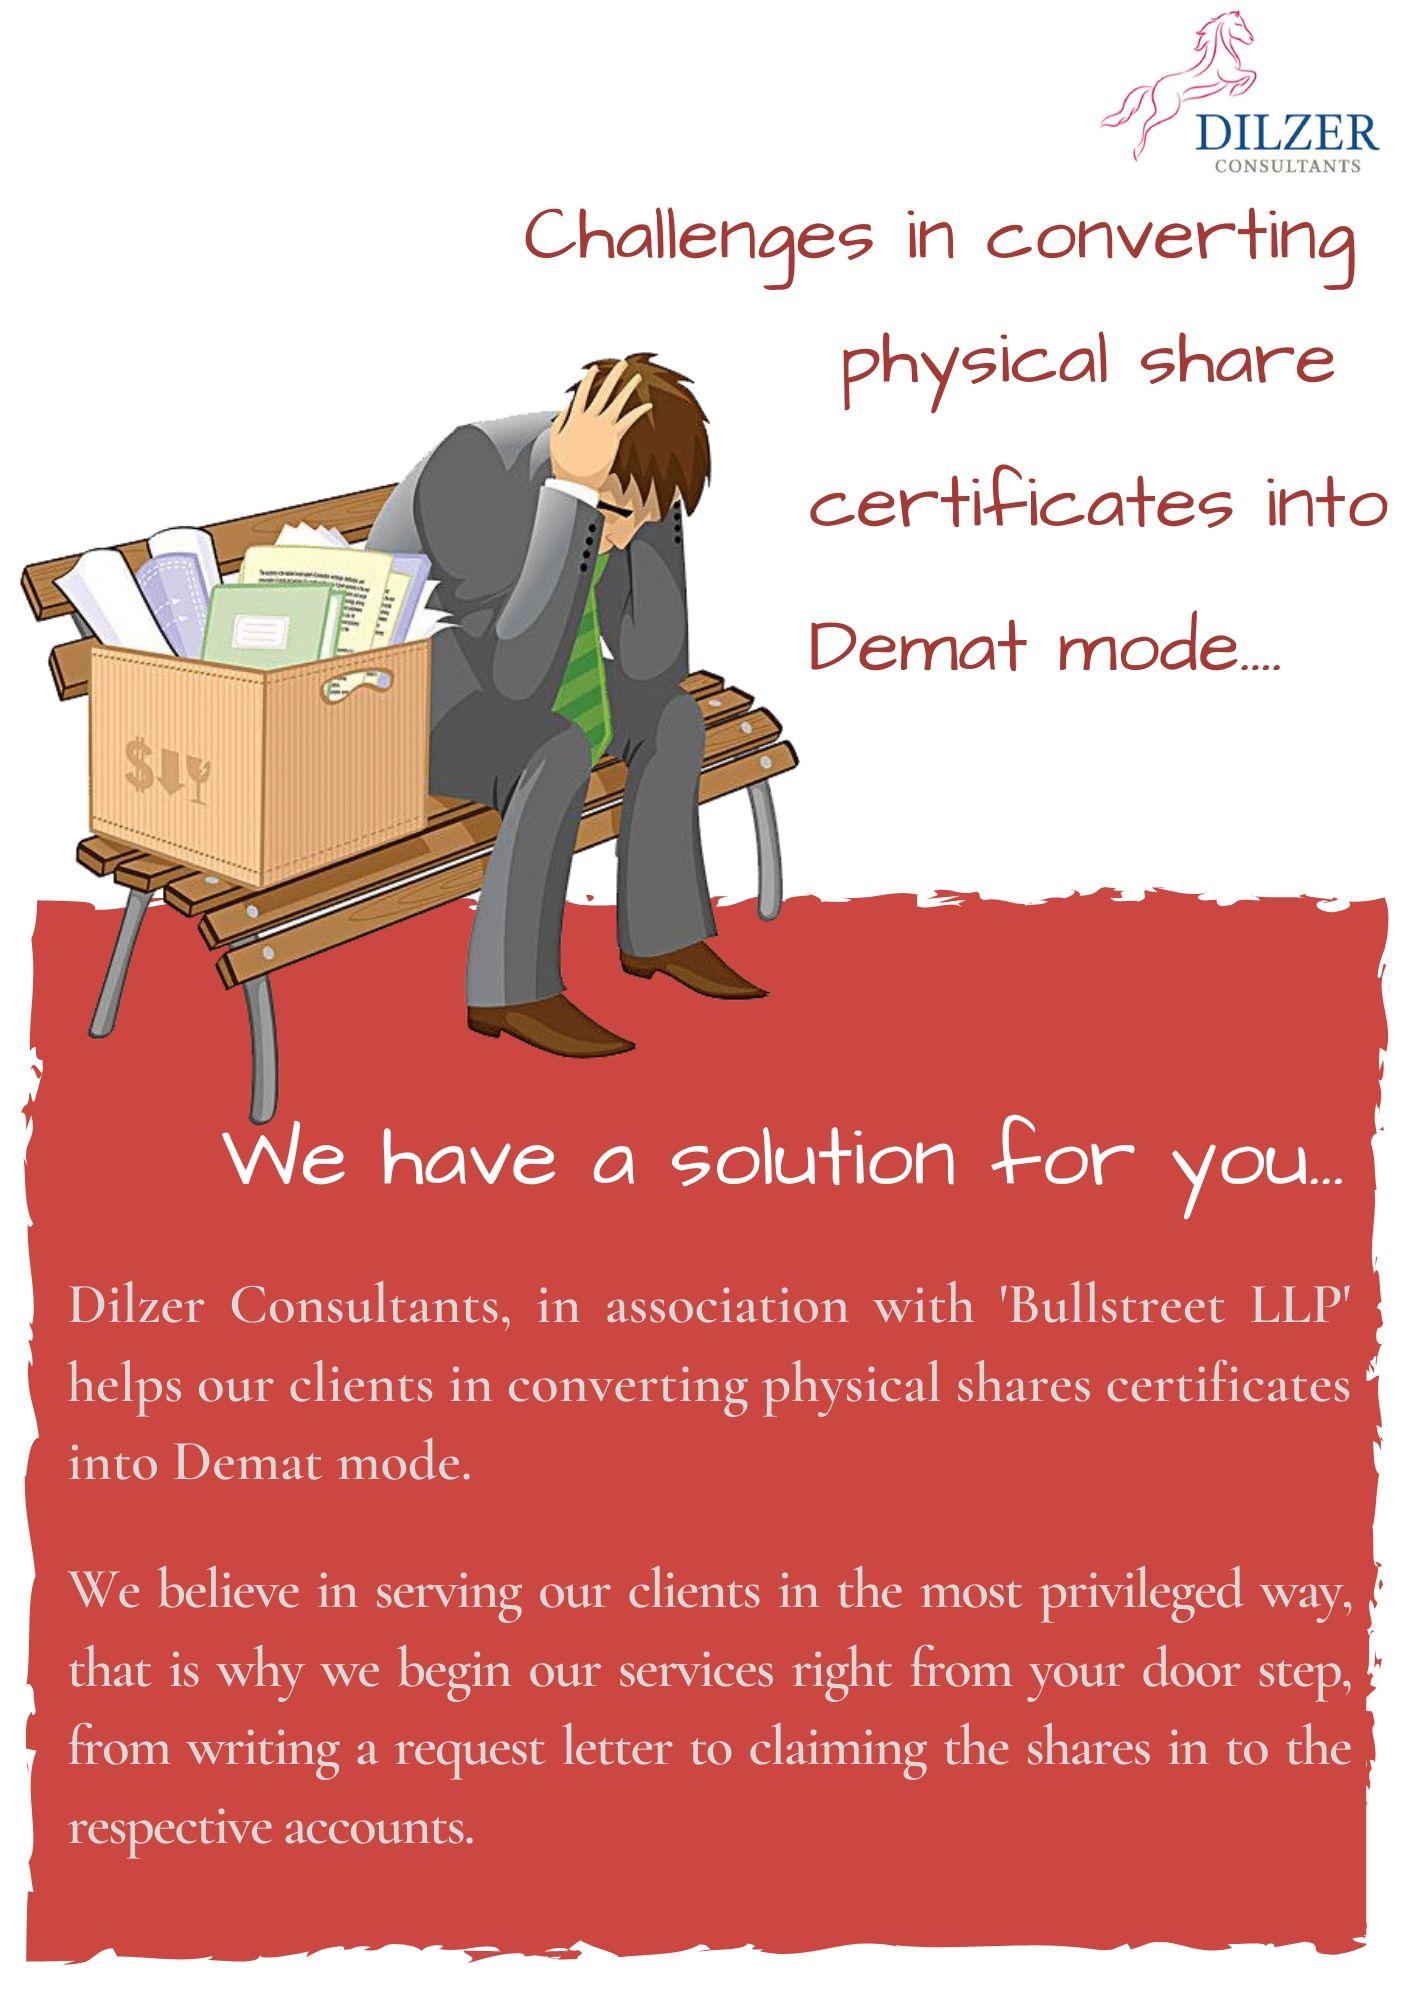 Challenge in converting physical share certificates into Demat mode.